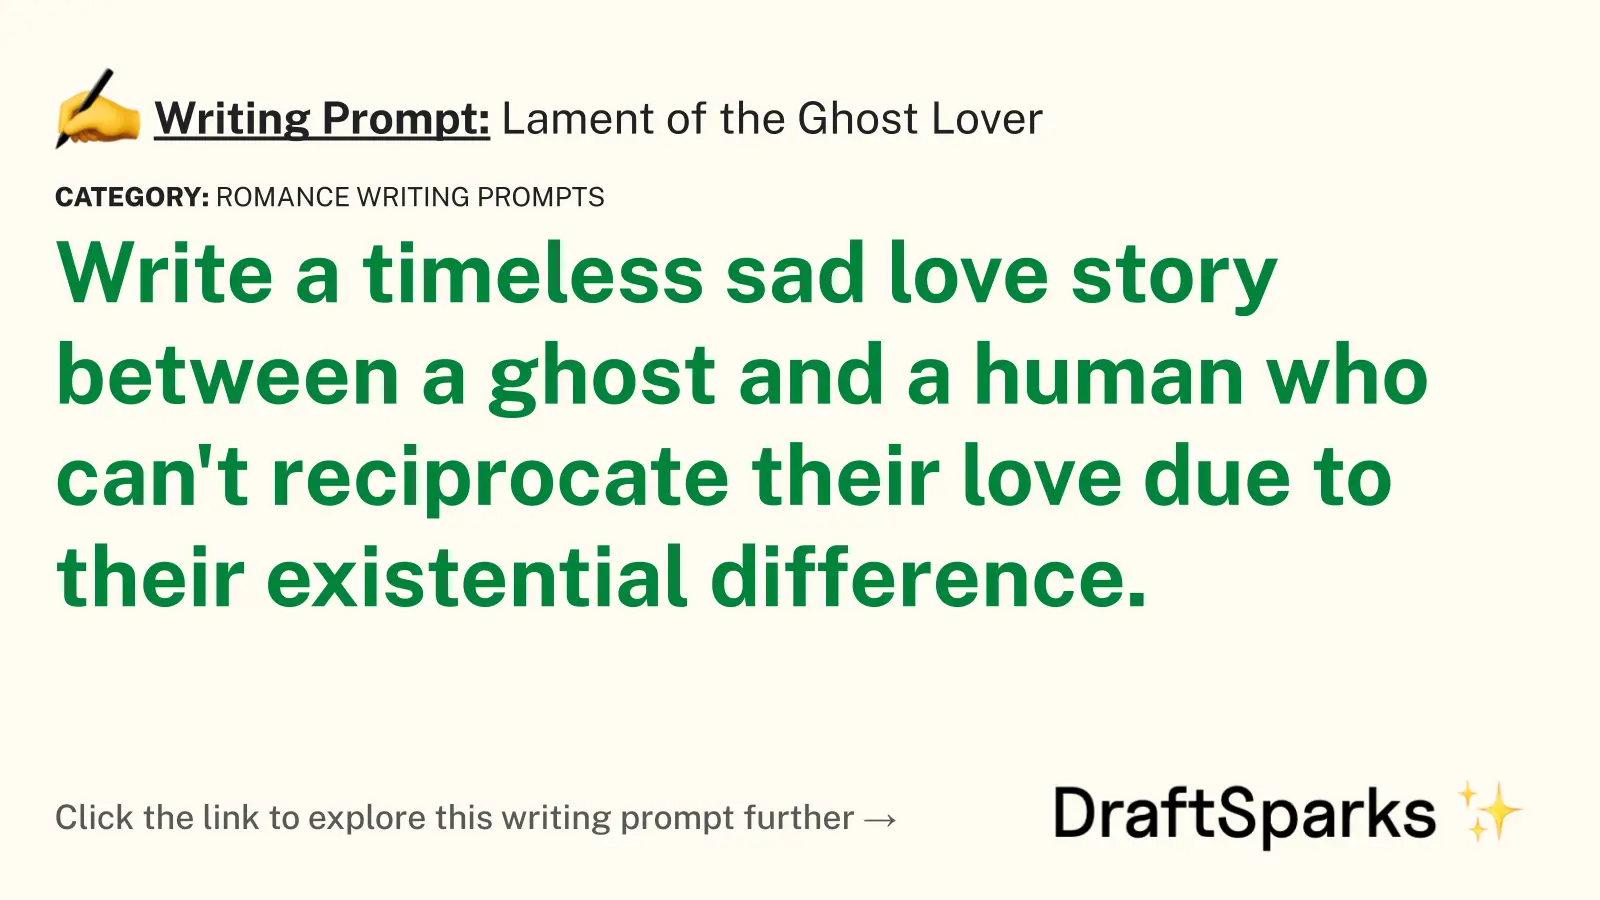 Lament of the Ghost Lover